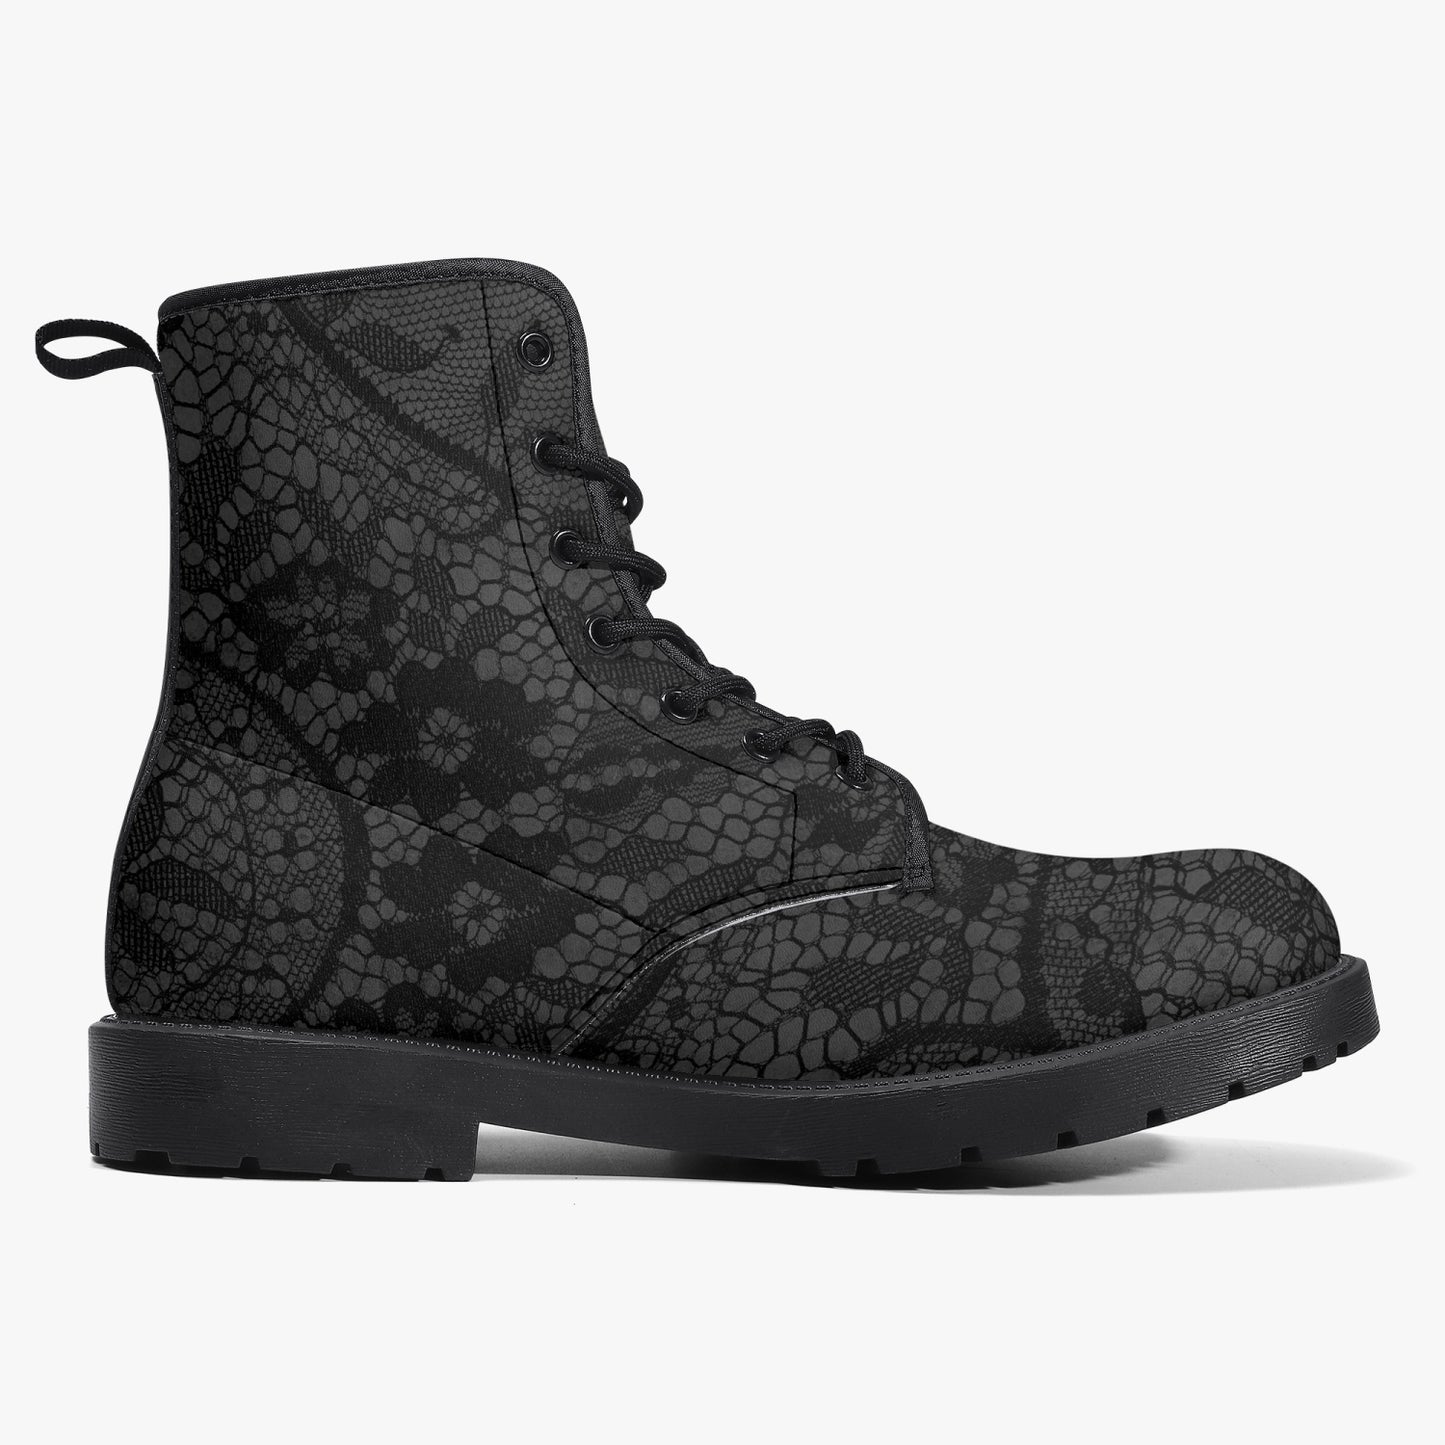 Gothic Grey and Black Lace Vegan leather Combat Boots - Vegan Leather Goth Boots (JPREG81)